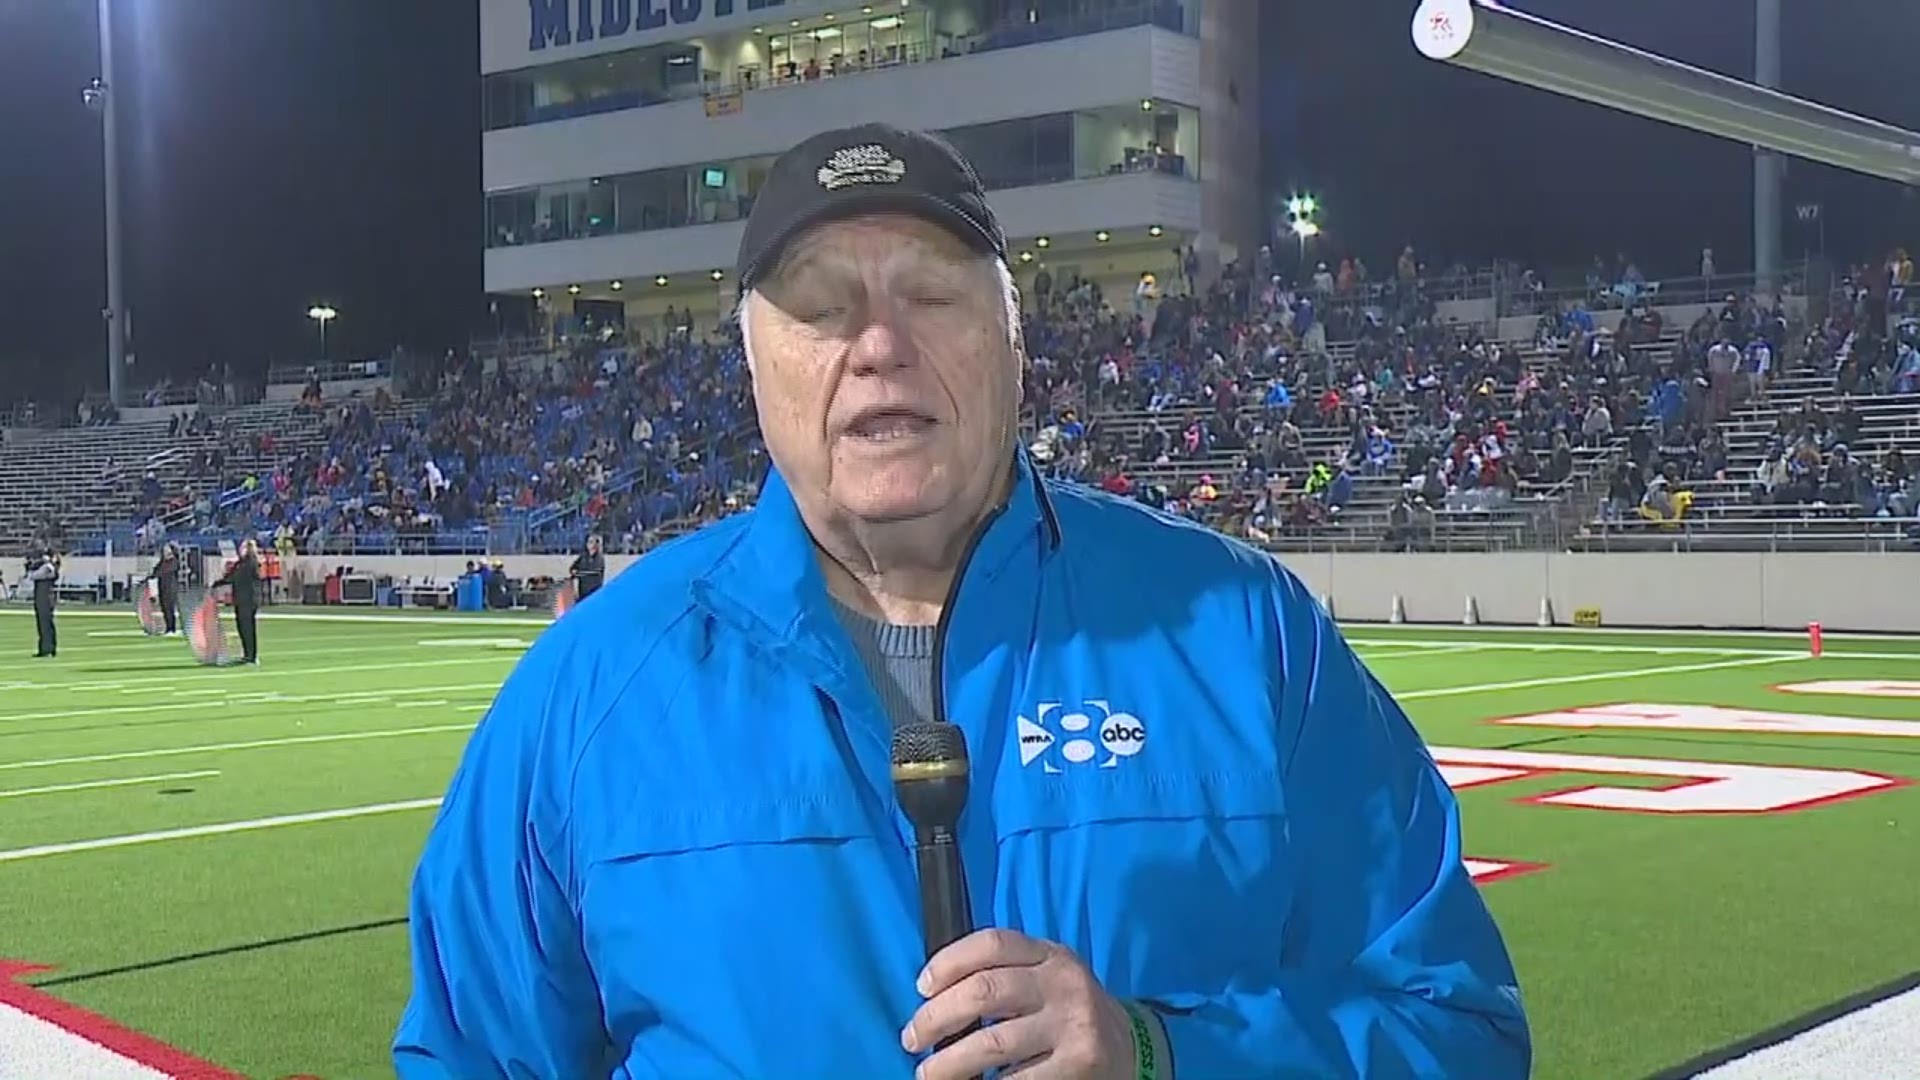 #GAMEOFTHEWEEK: It's Friday night and Dale Hansen is at our game of the week: Springtown vs. La Vega.